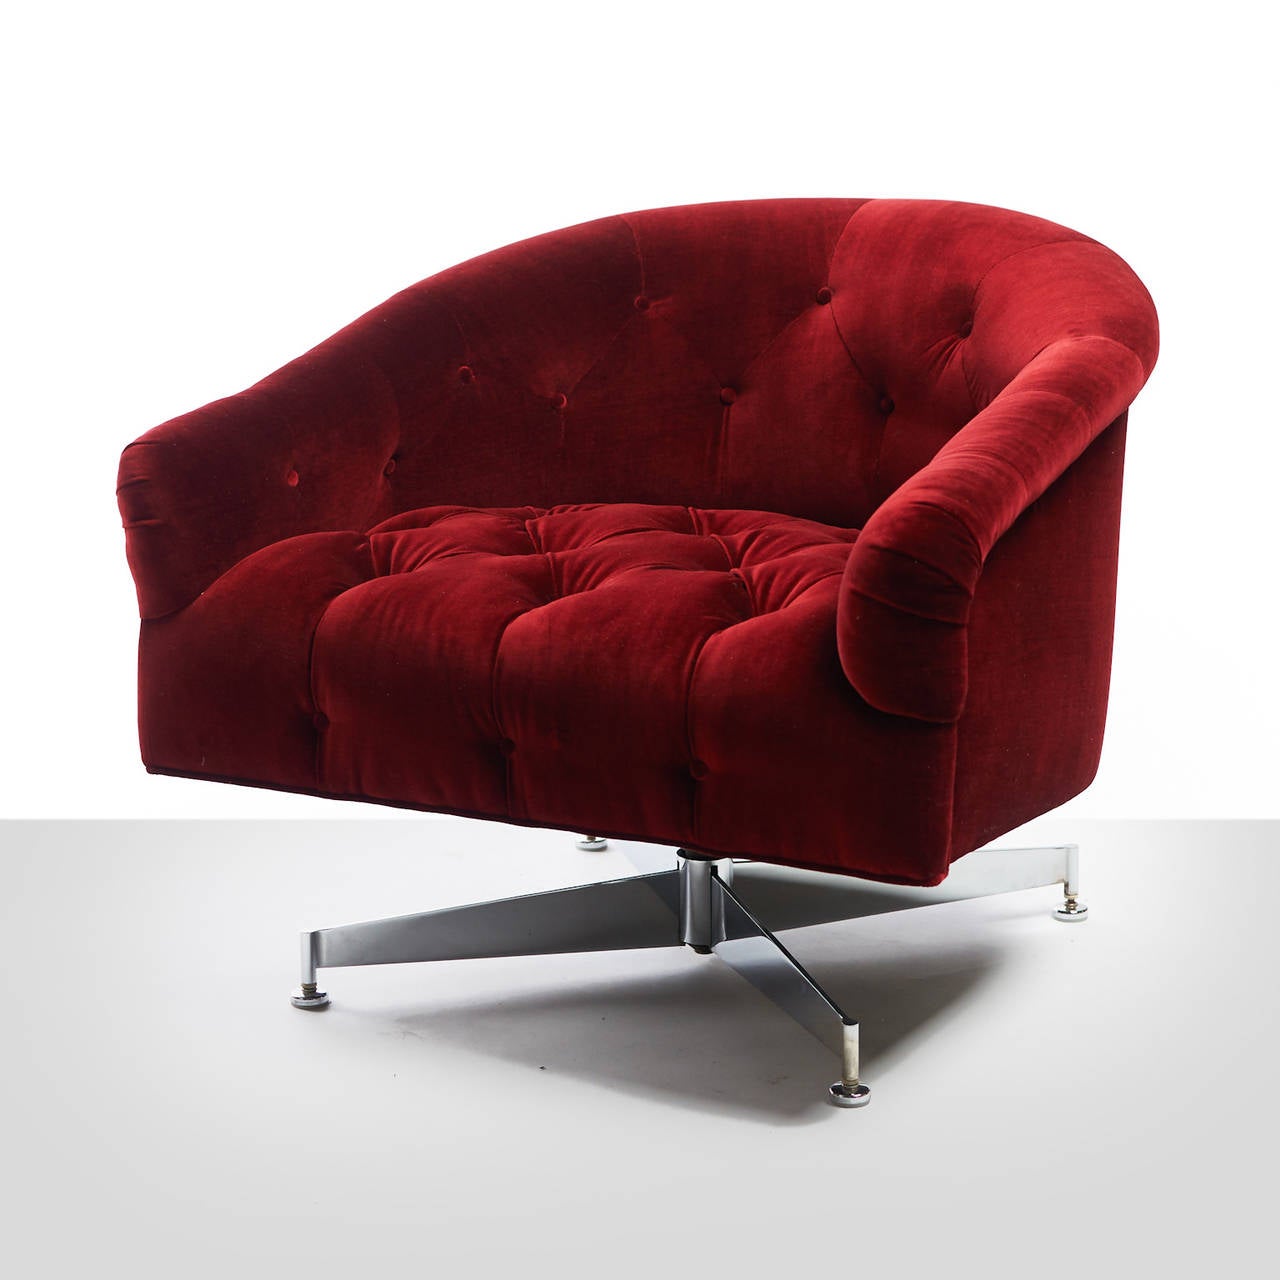 A pair of button tufted swivel lounge chairs by Ward Bennett. Recently restored in a crimson velvet. Steel four-leg base.

One chair has been sold and the single available.